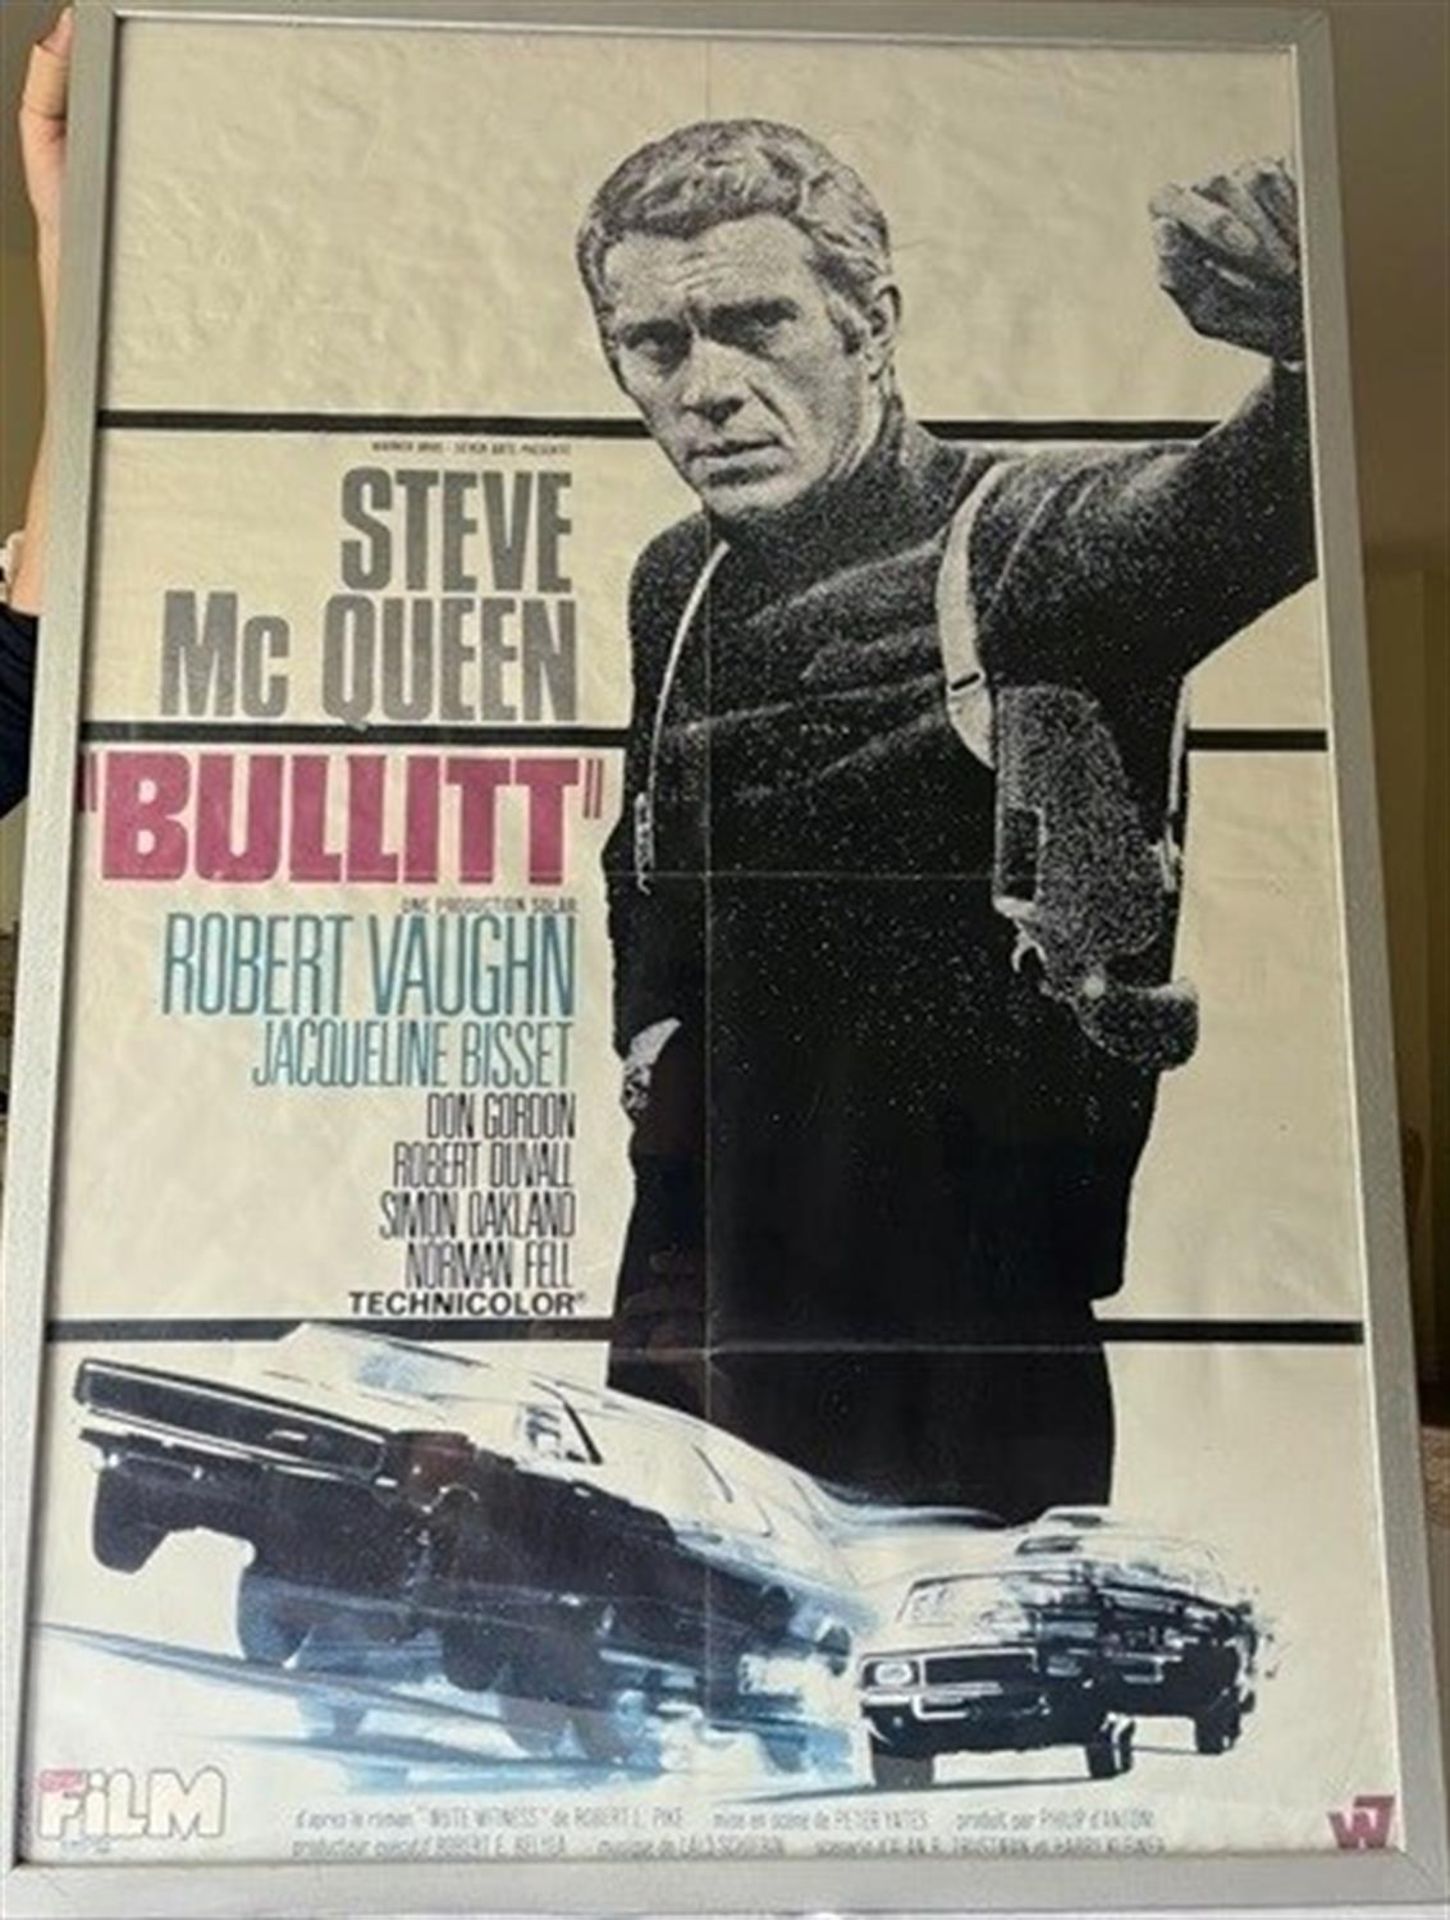 Double Sided 'You Only Live Twice' and 'Bullitt' Cinema Promotional Poster - Image 3 of 3